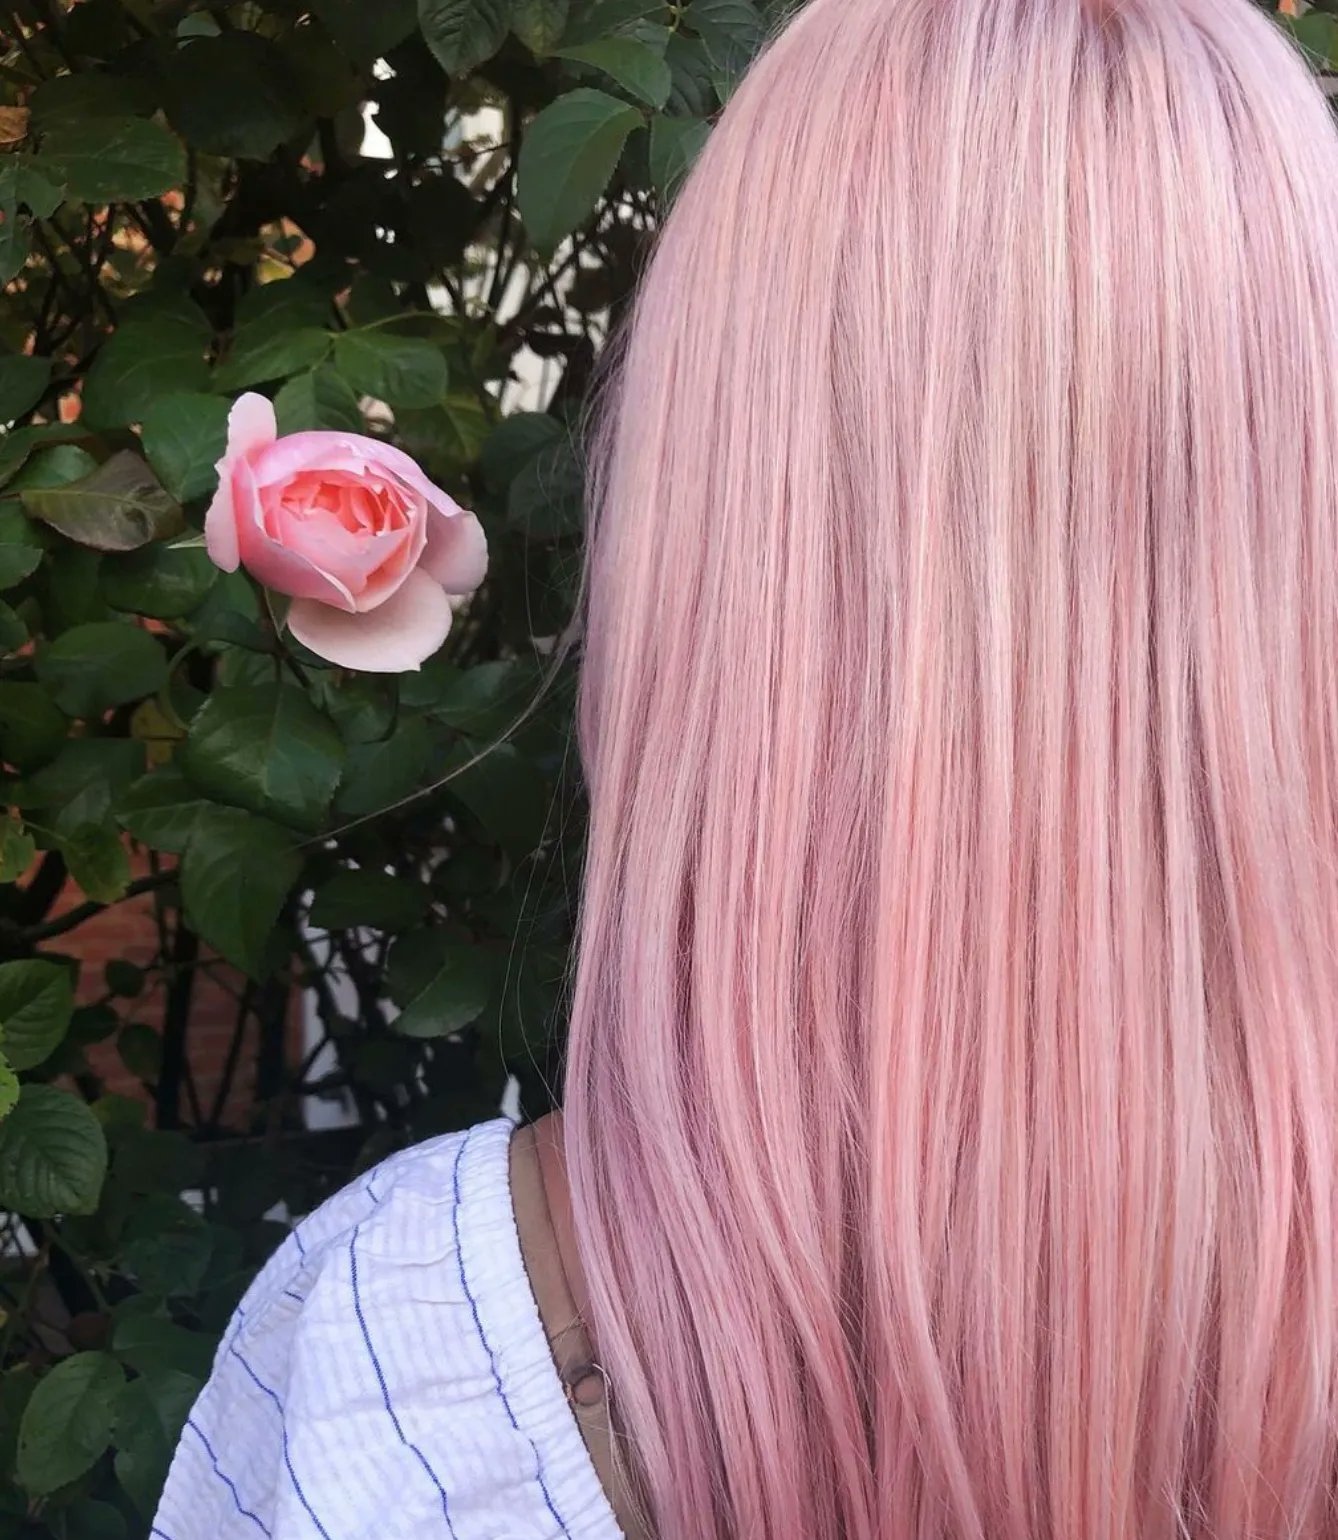 Hunt Or Dye on Twitter: "Using @bleachlondon Rosé Toner 🌸 The rose helps reduce yellow tones in your and adds a / Rose tint finish Hair by @poppyhugheshair Shop